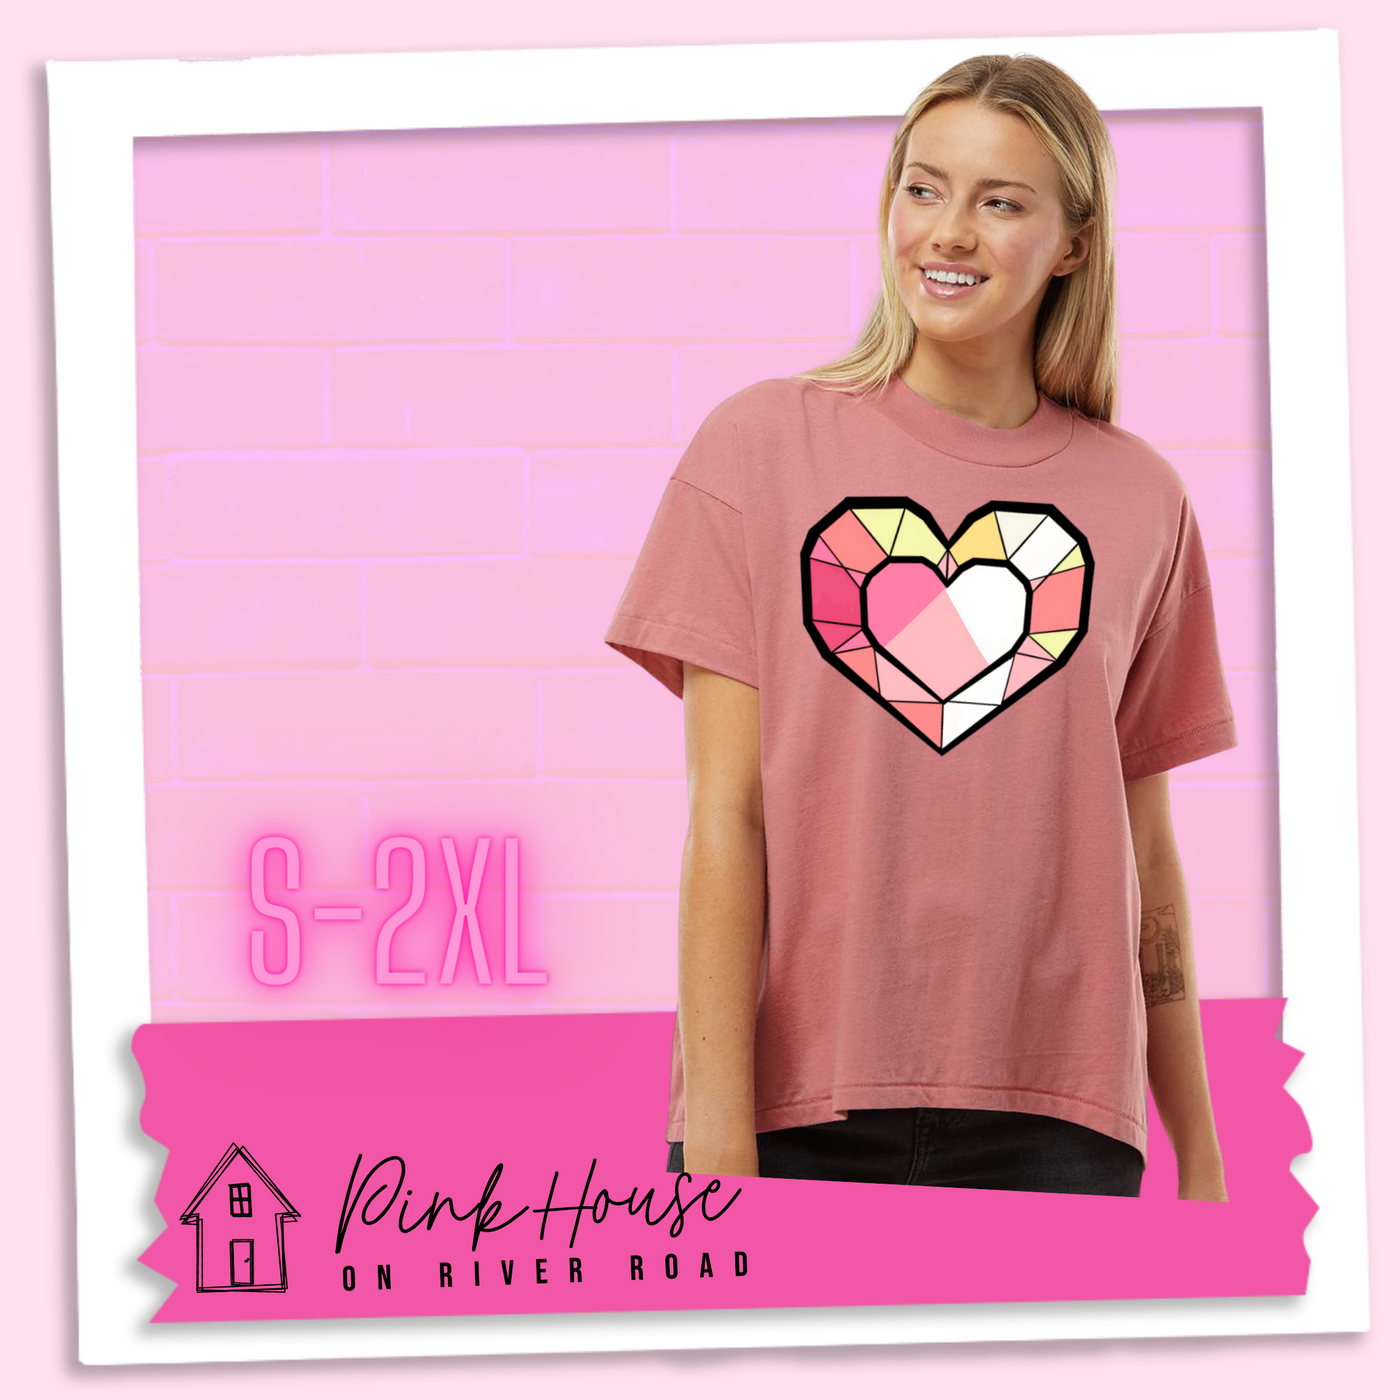 A blonde woman wearing a oversized mauve HiLo graphic tee. the graphic is of ageometric heart, it has black outlines to make it look like a gem with different shades of pinks, yellows, and white.